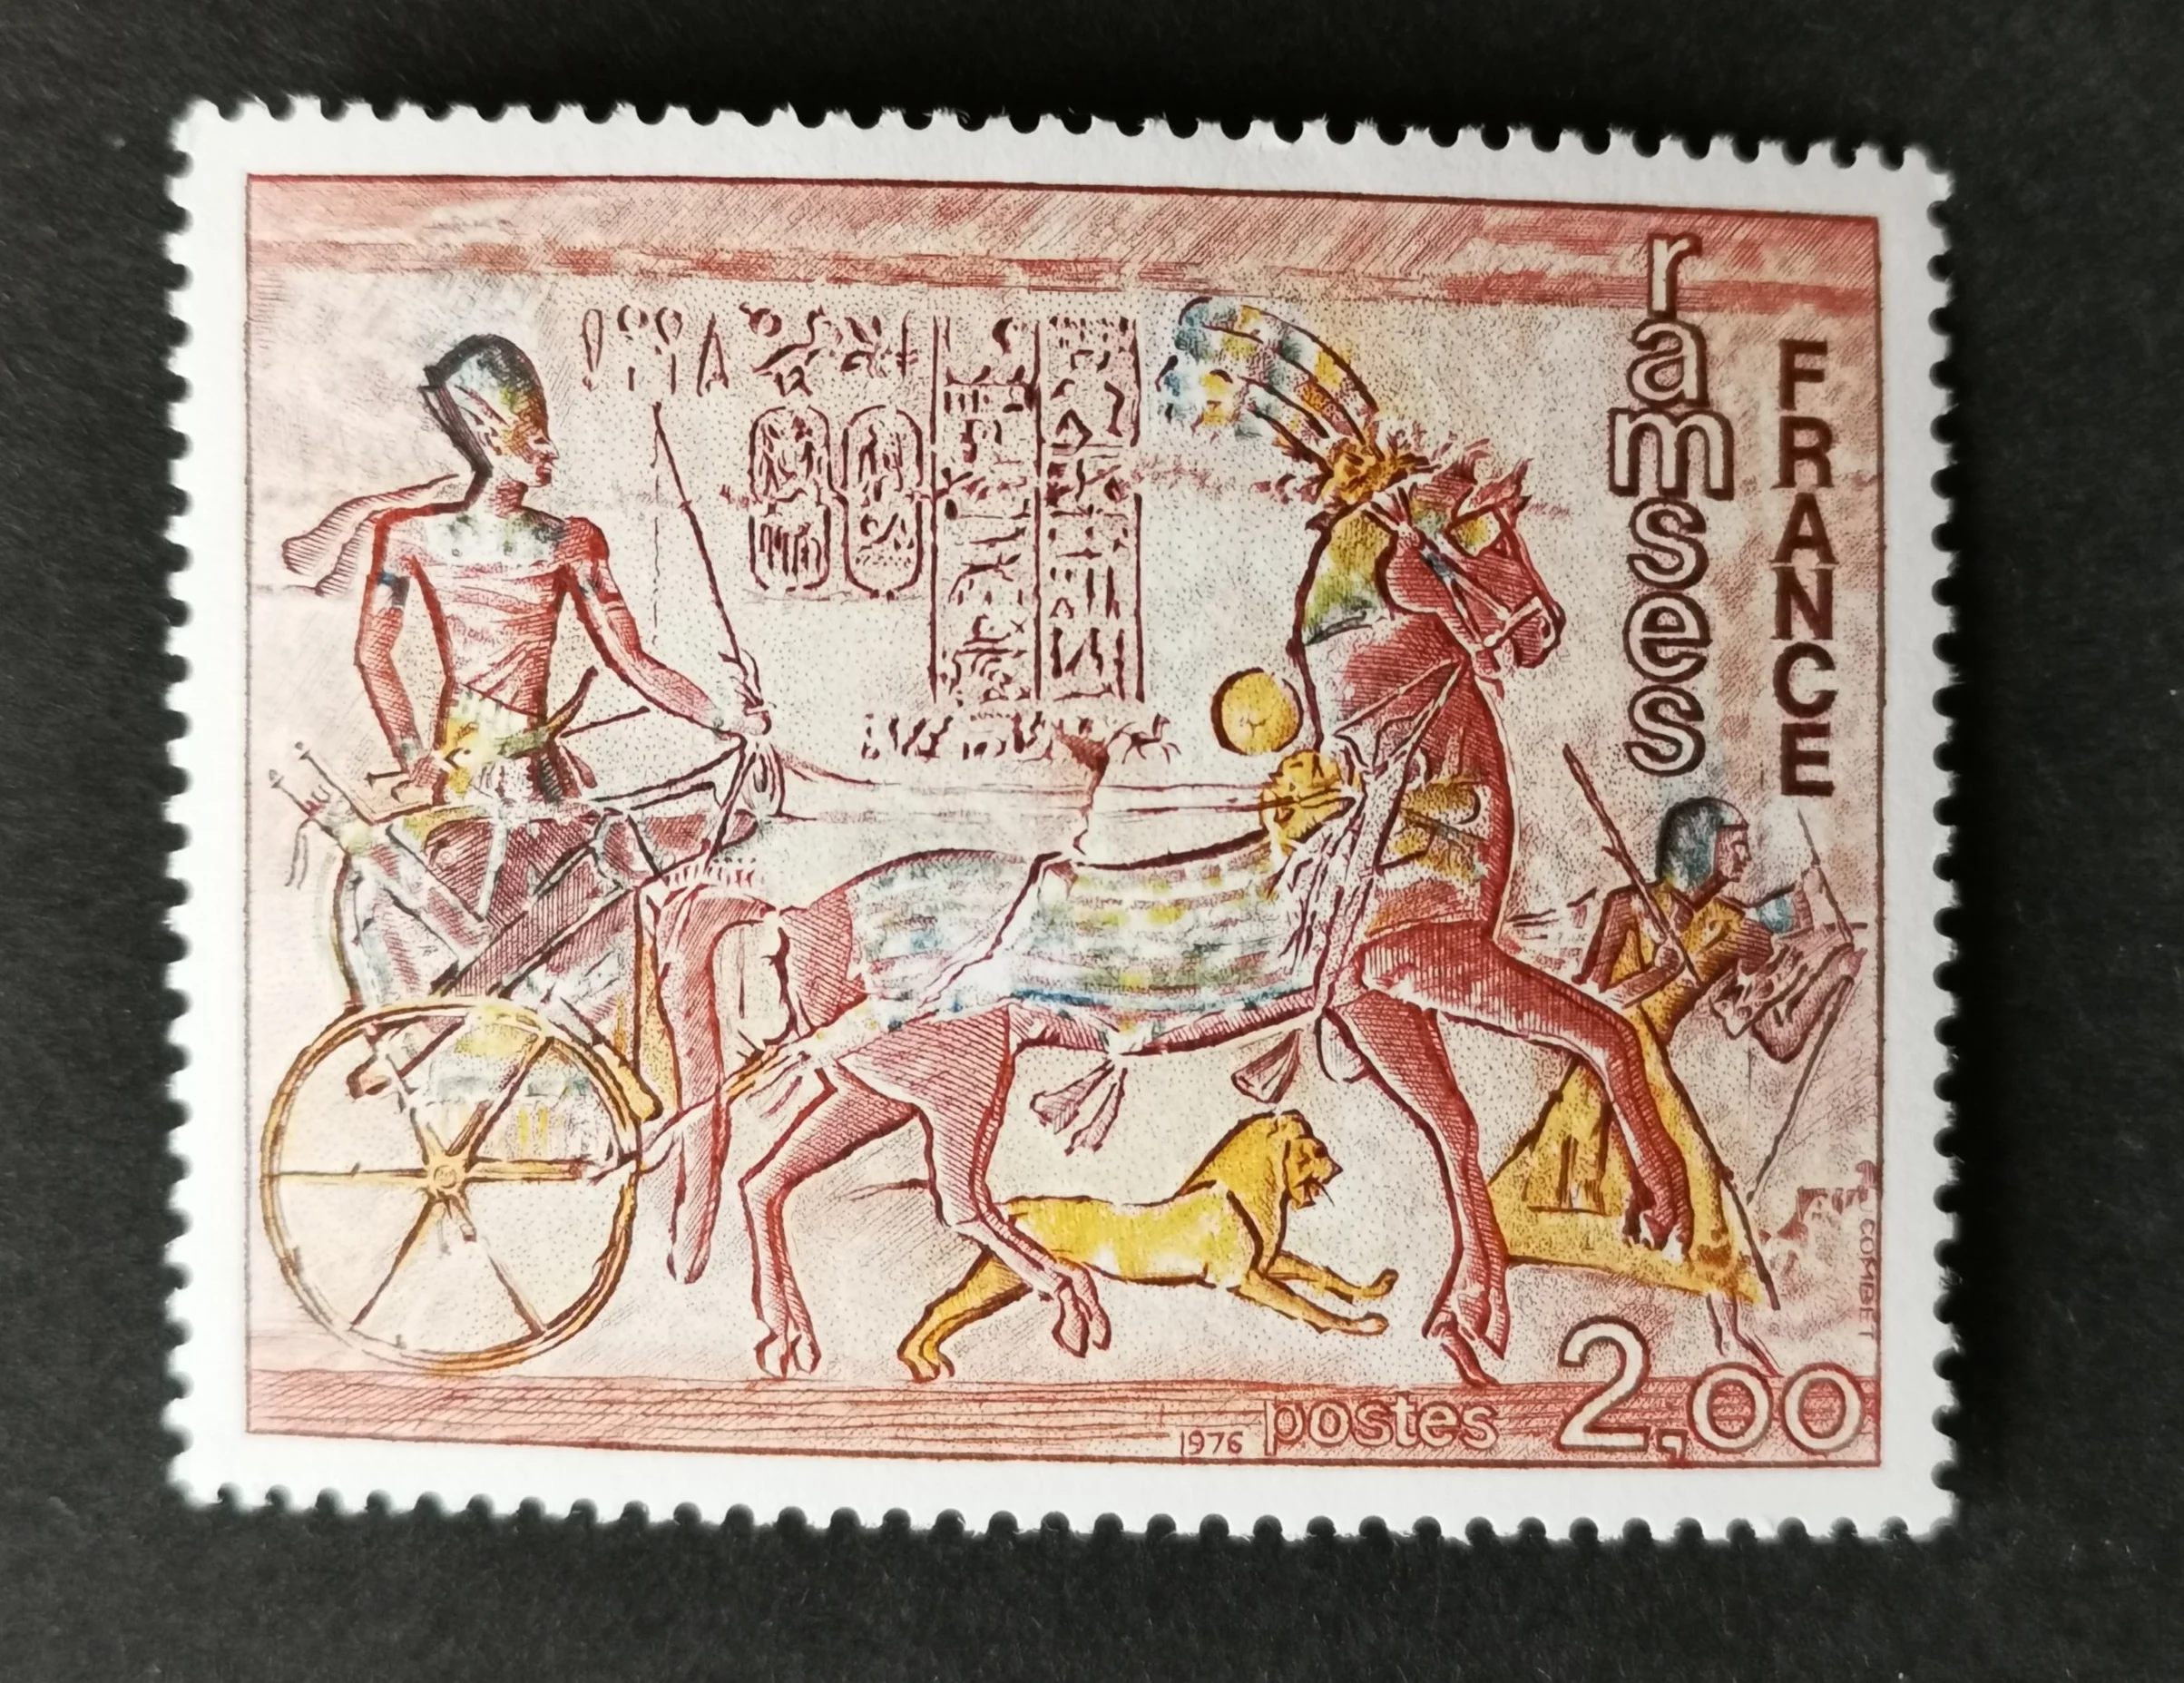 

1Pcs/Set New France Post Stamp 1976 Painting Art Chariots In Ancient Egyptian Temples Engraving Postage Stamps MNH